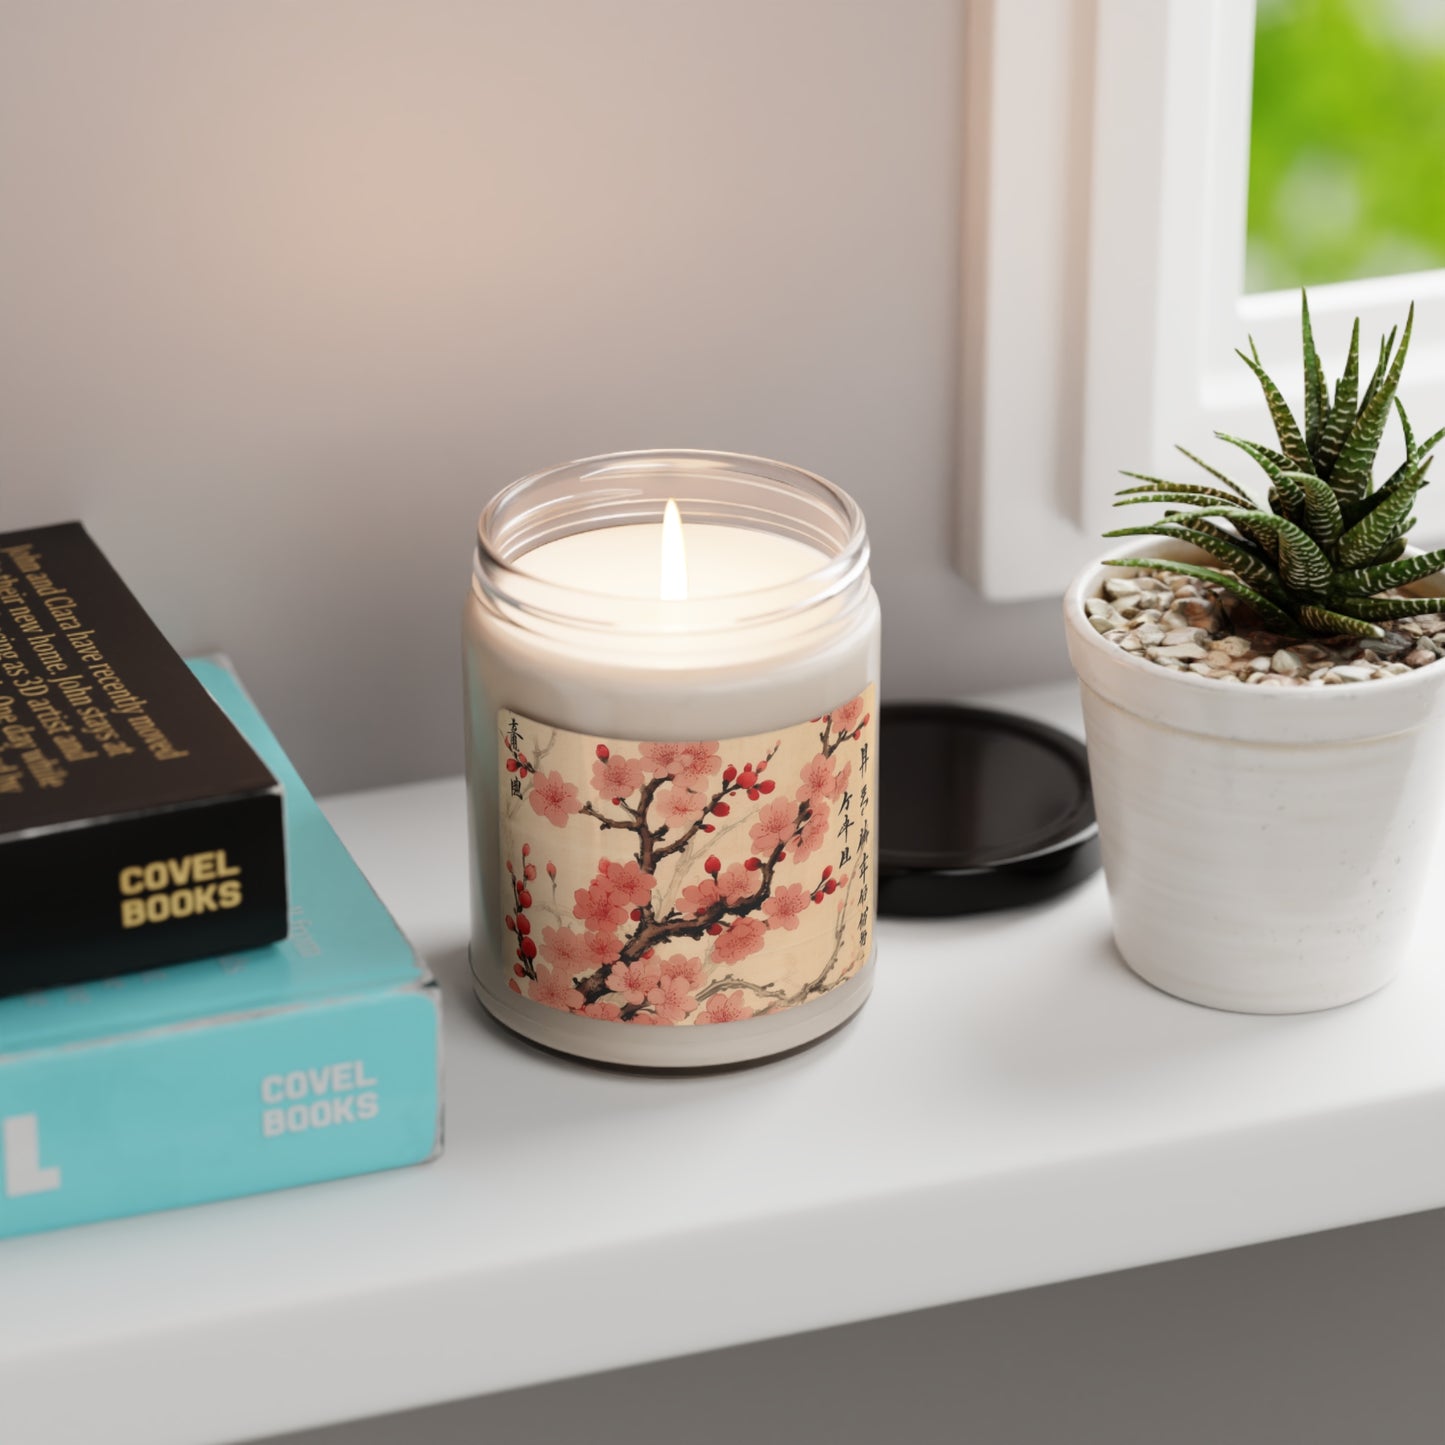 Floral Fusion: Scented Soy Candle Merging Cherry Blossom Beauty and Artistic Flower Drawings